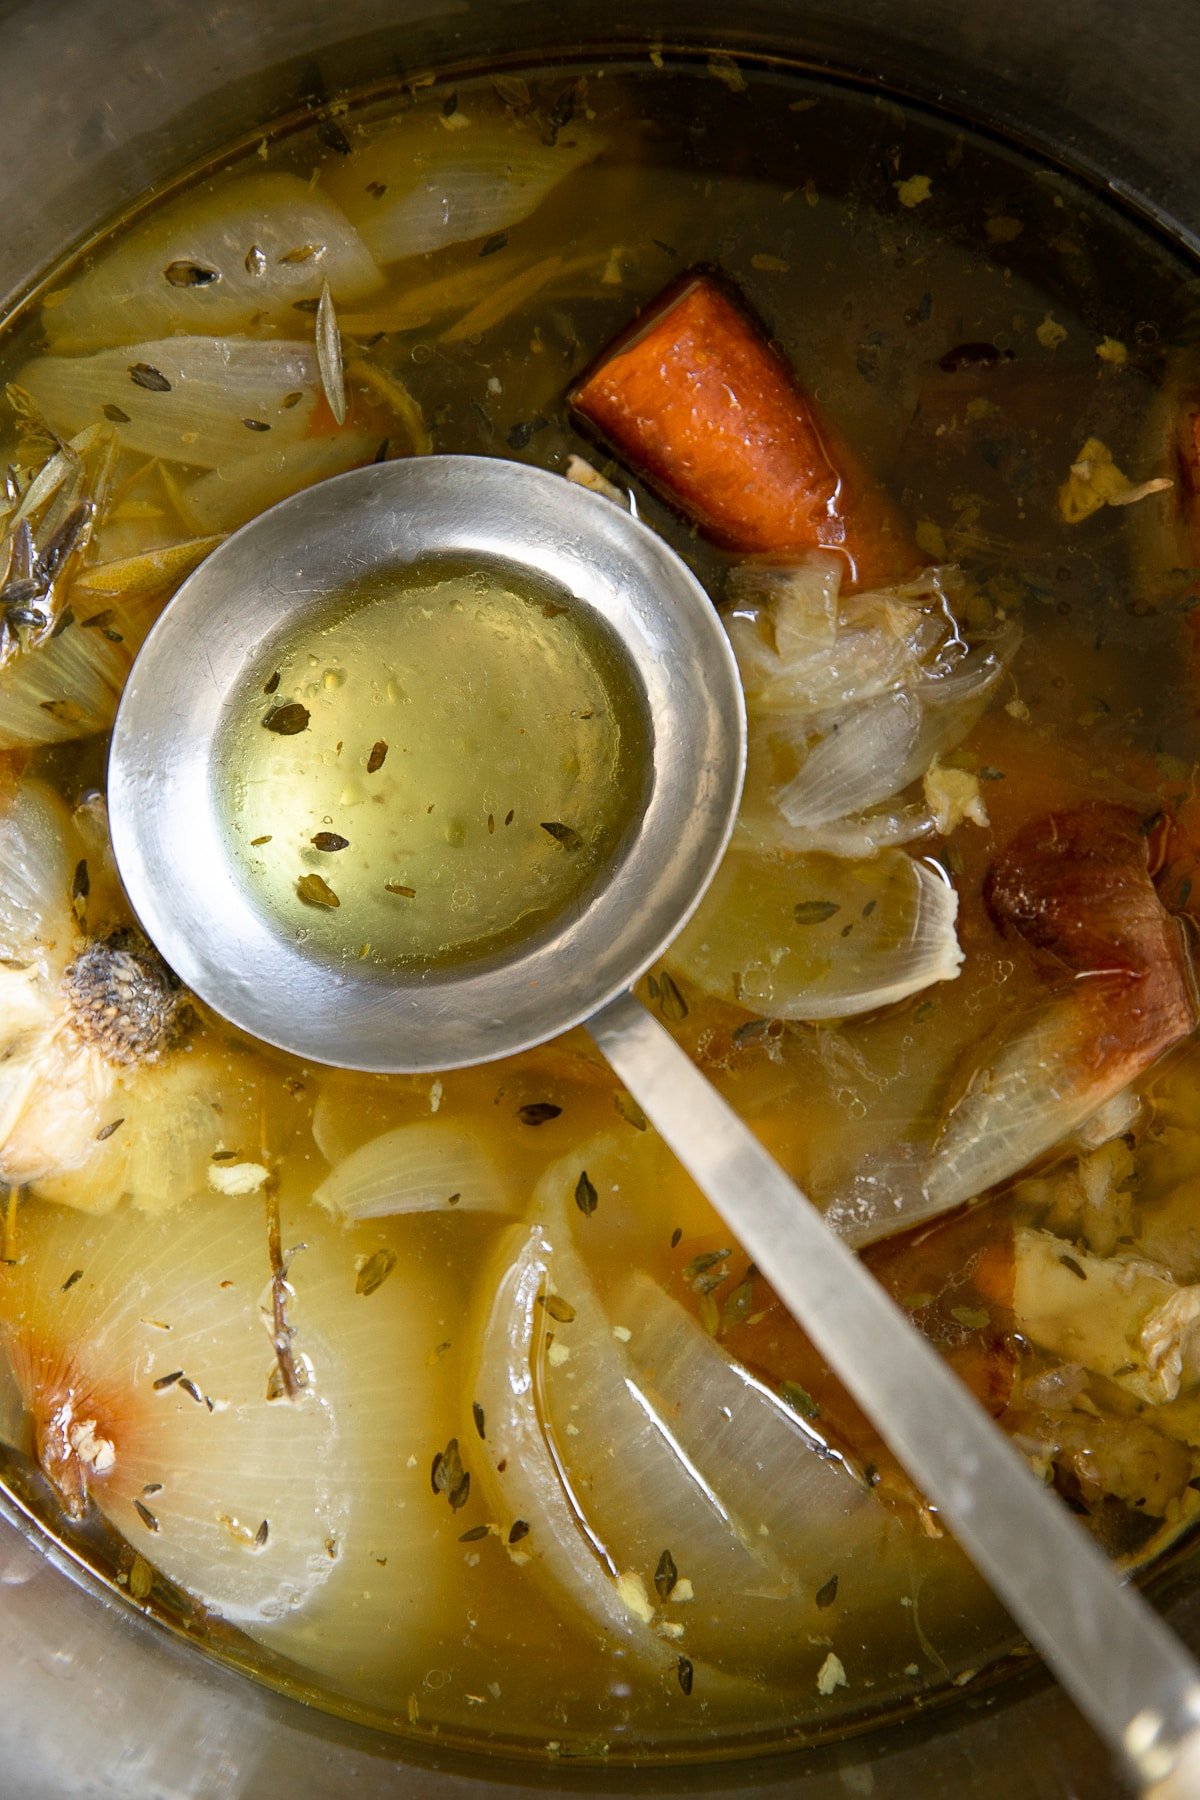 Ladle in a large pot filled with boiled chicken stock and roasting vegetables.